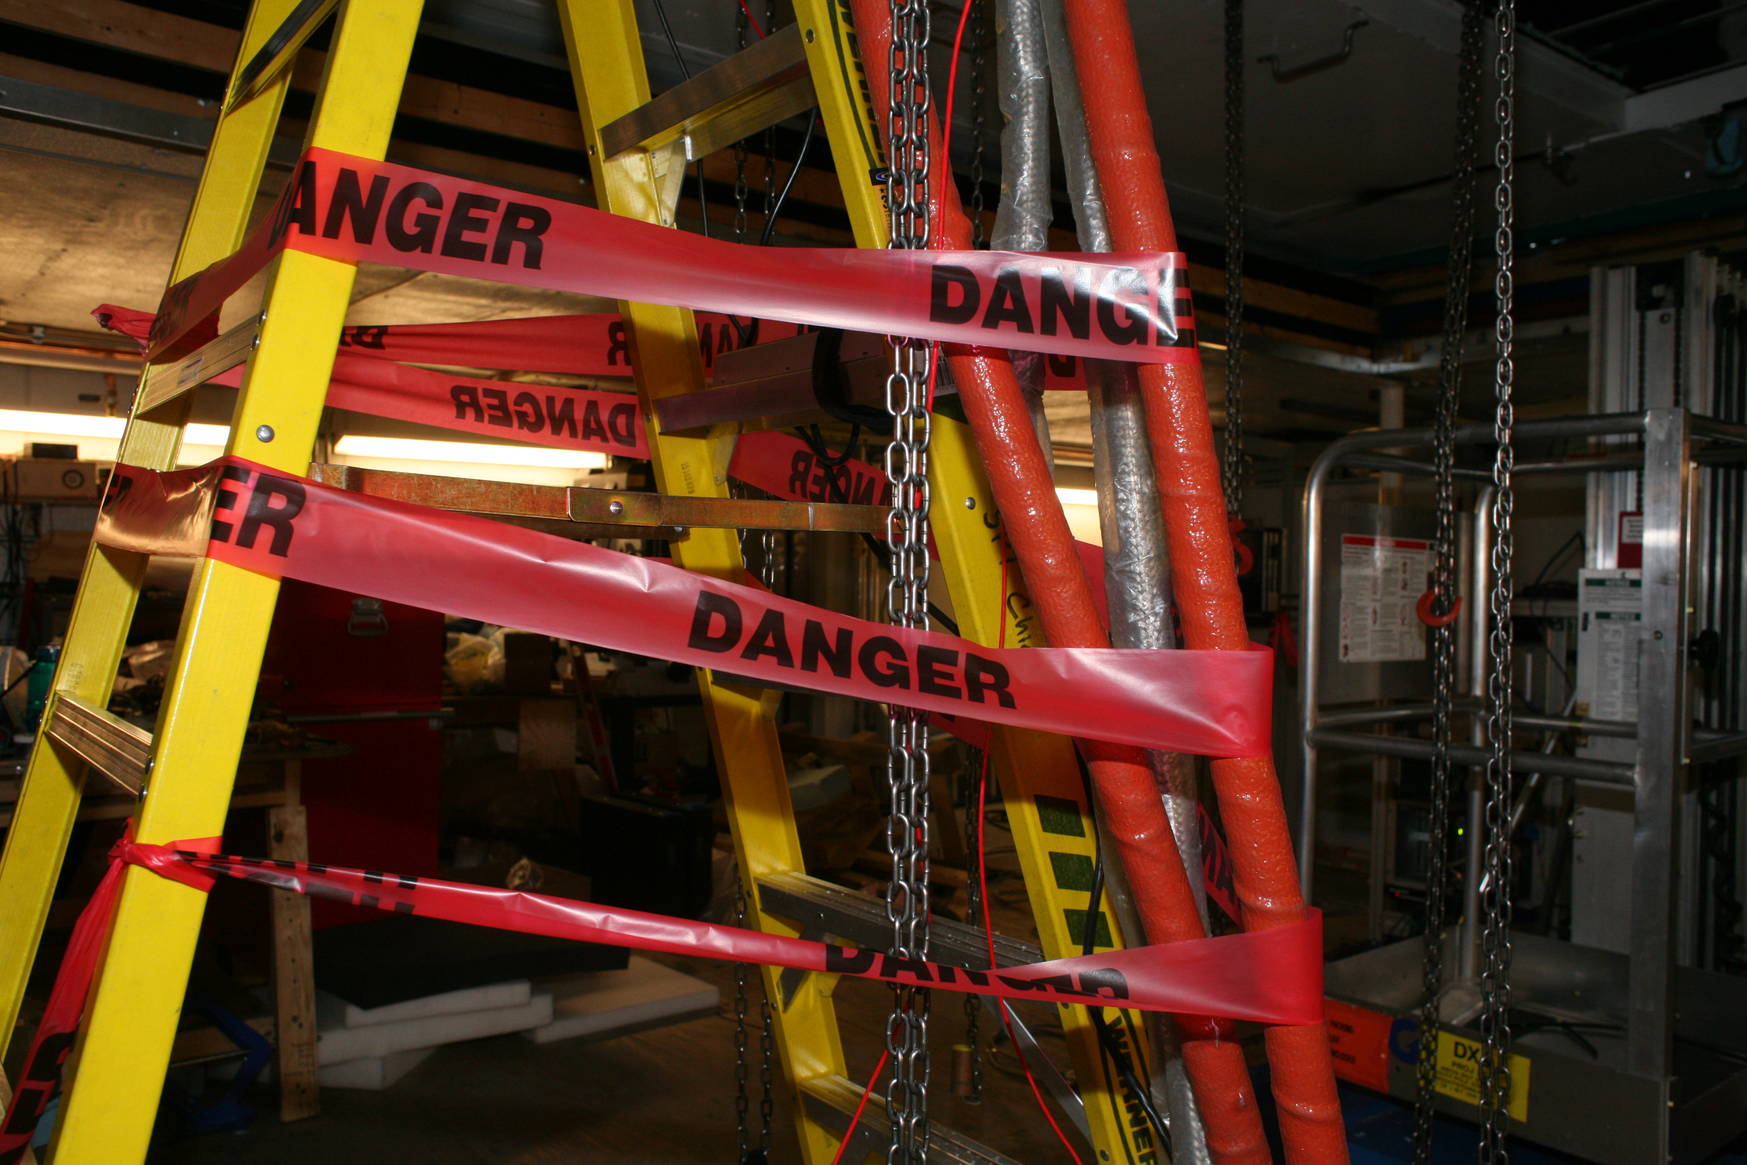 Safety was our utmost concern during the hoisting operation.